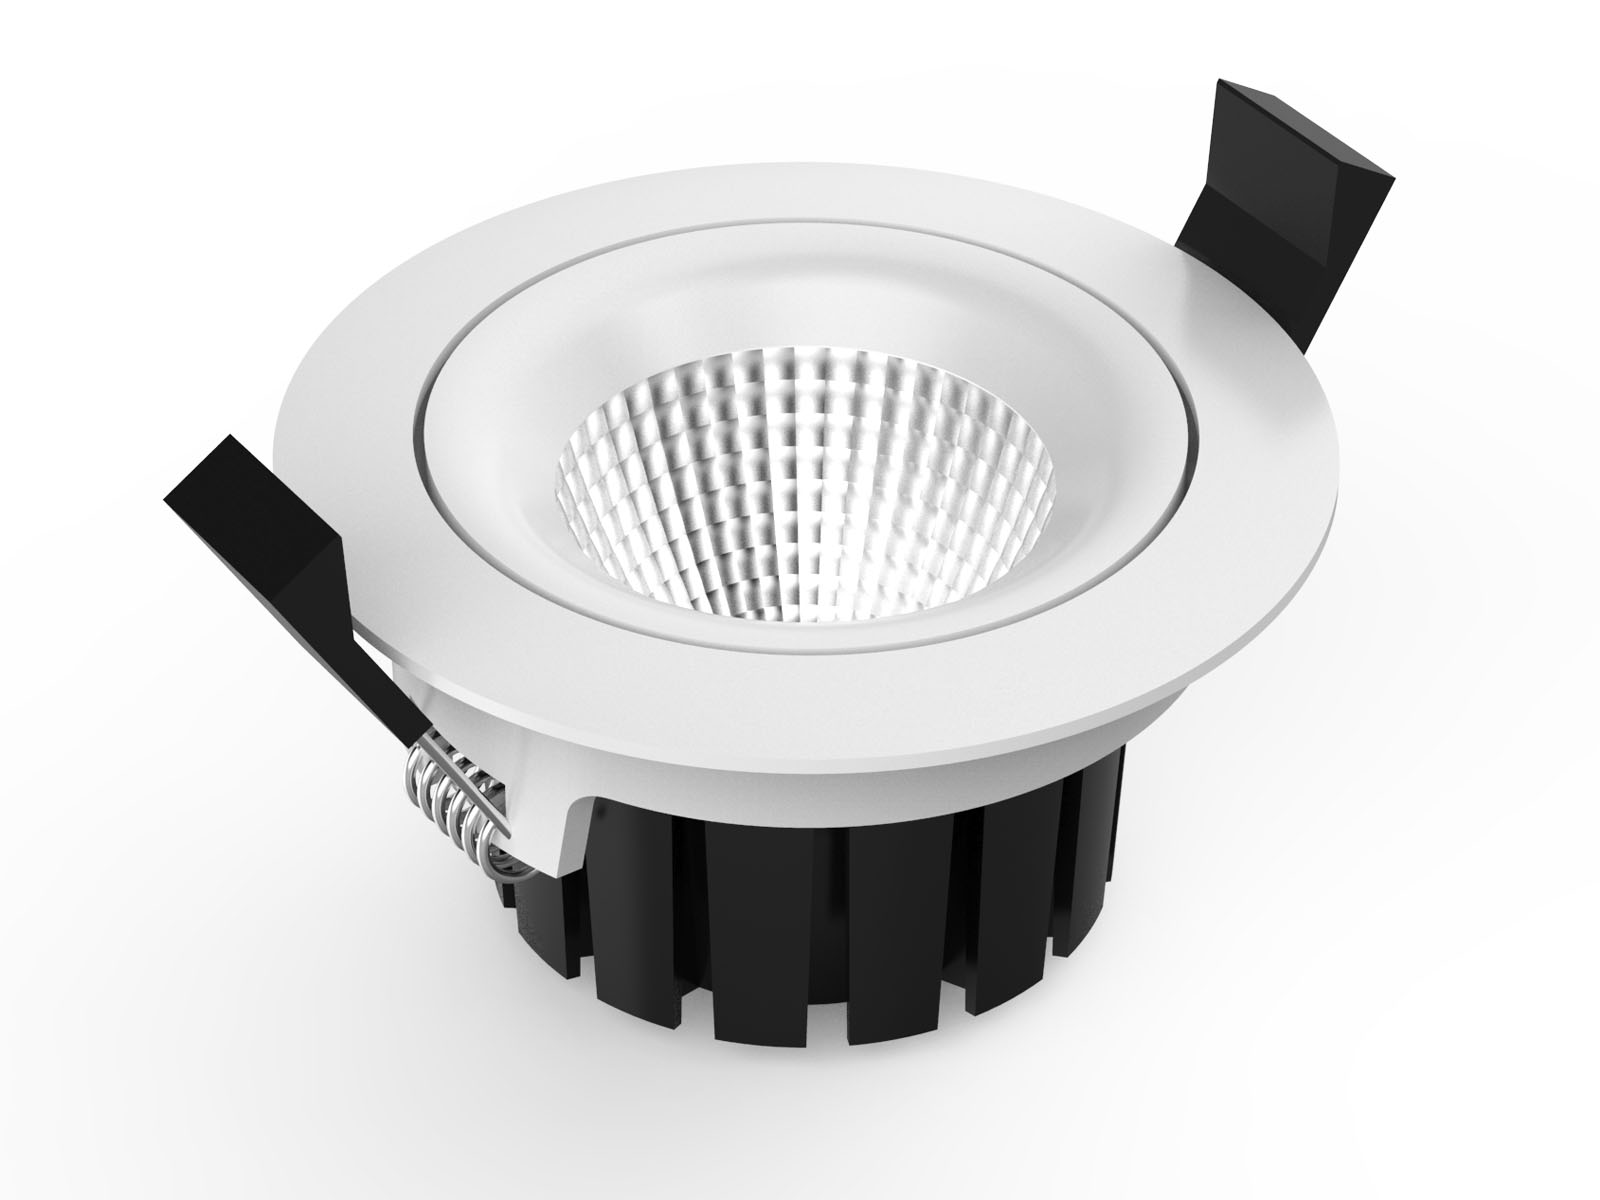 CL76 2 led downlight dimming